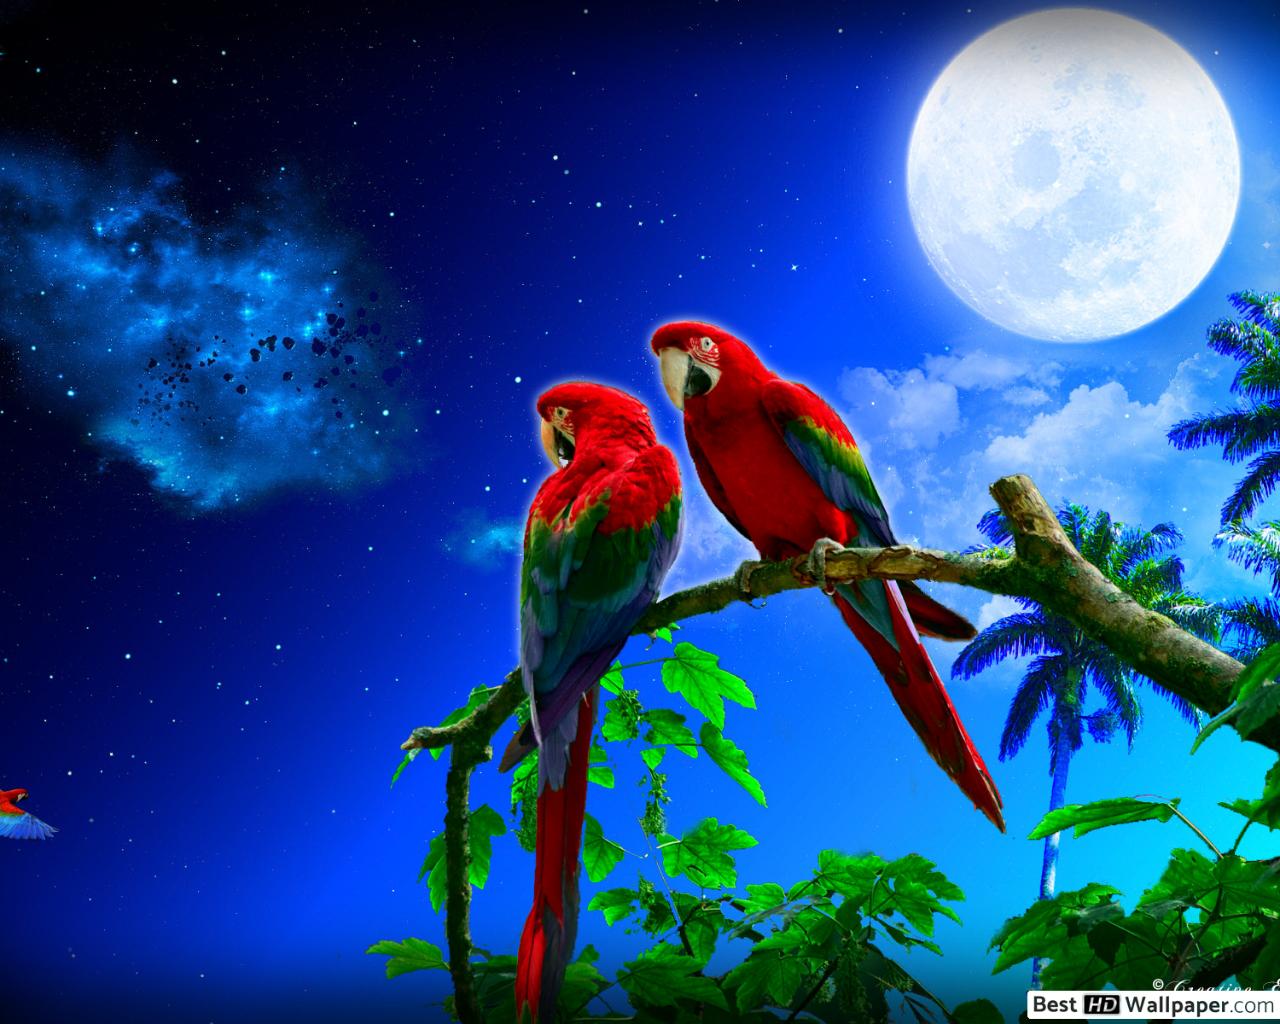 Tropical Night Sky Wallpapers on WallpaperDog